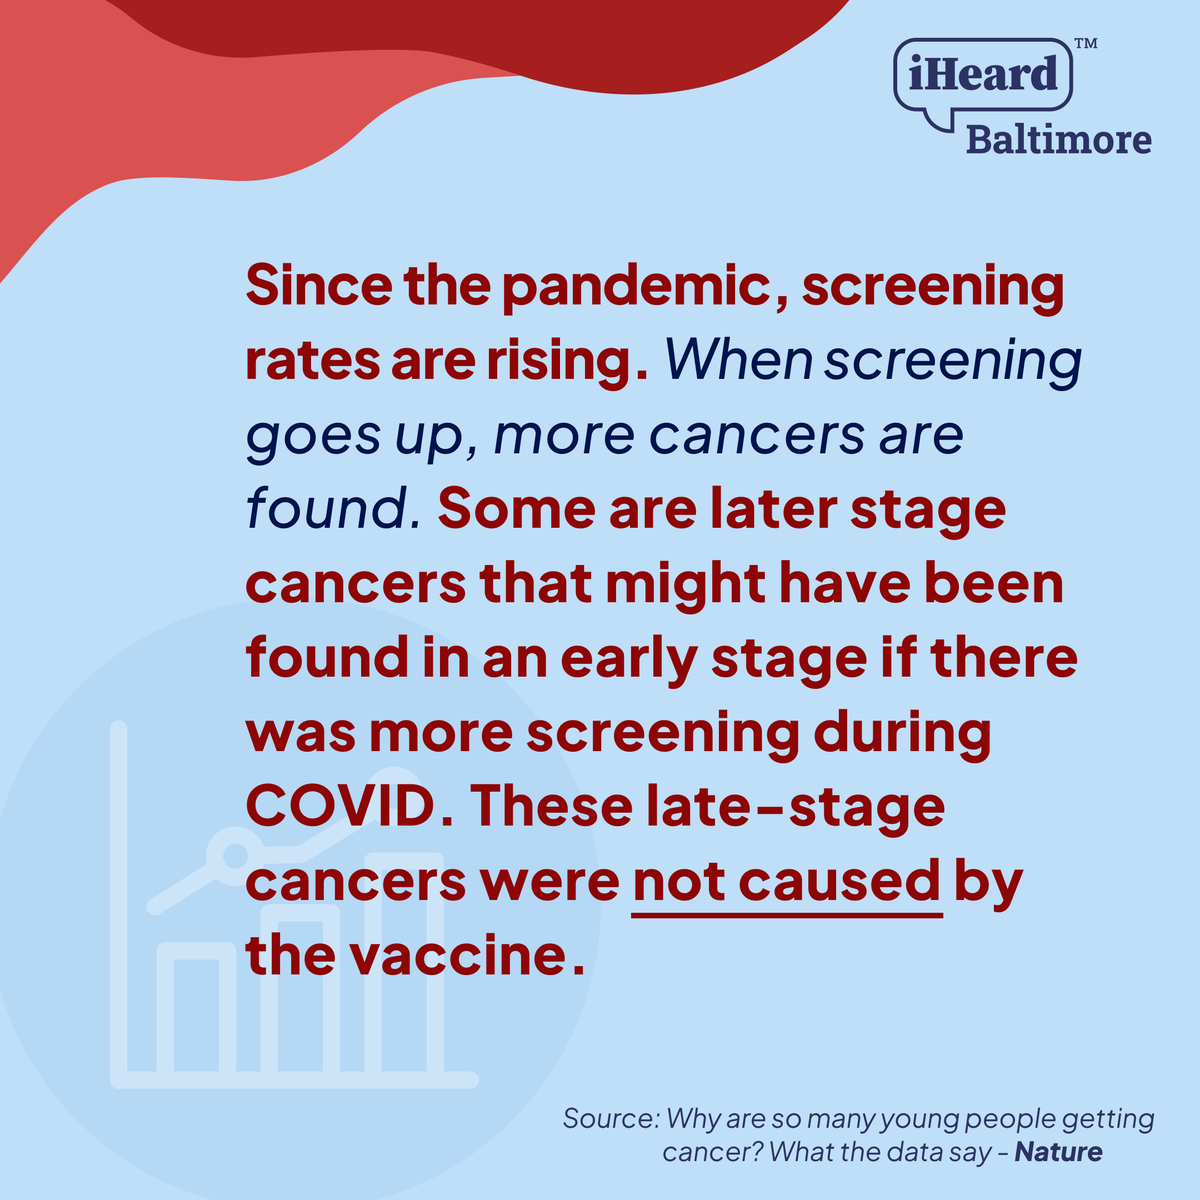 Share widely! Some are later stage cancers that might have been found sooner if there was more screening during COVID are being found as screening rates increase -- the cancer is not caused by the vaccine! #iHeardBaltimore #CancerScreening #COVIDVaccine #GetScreened